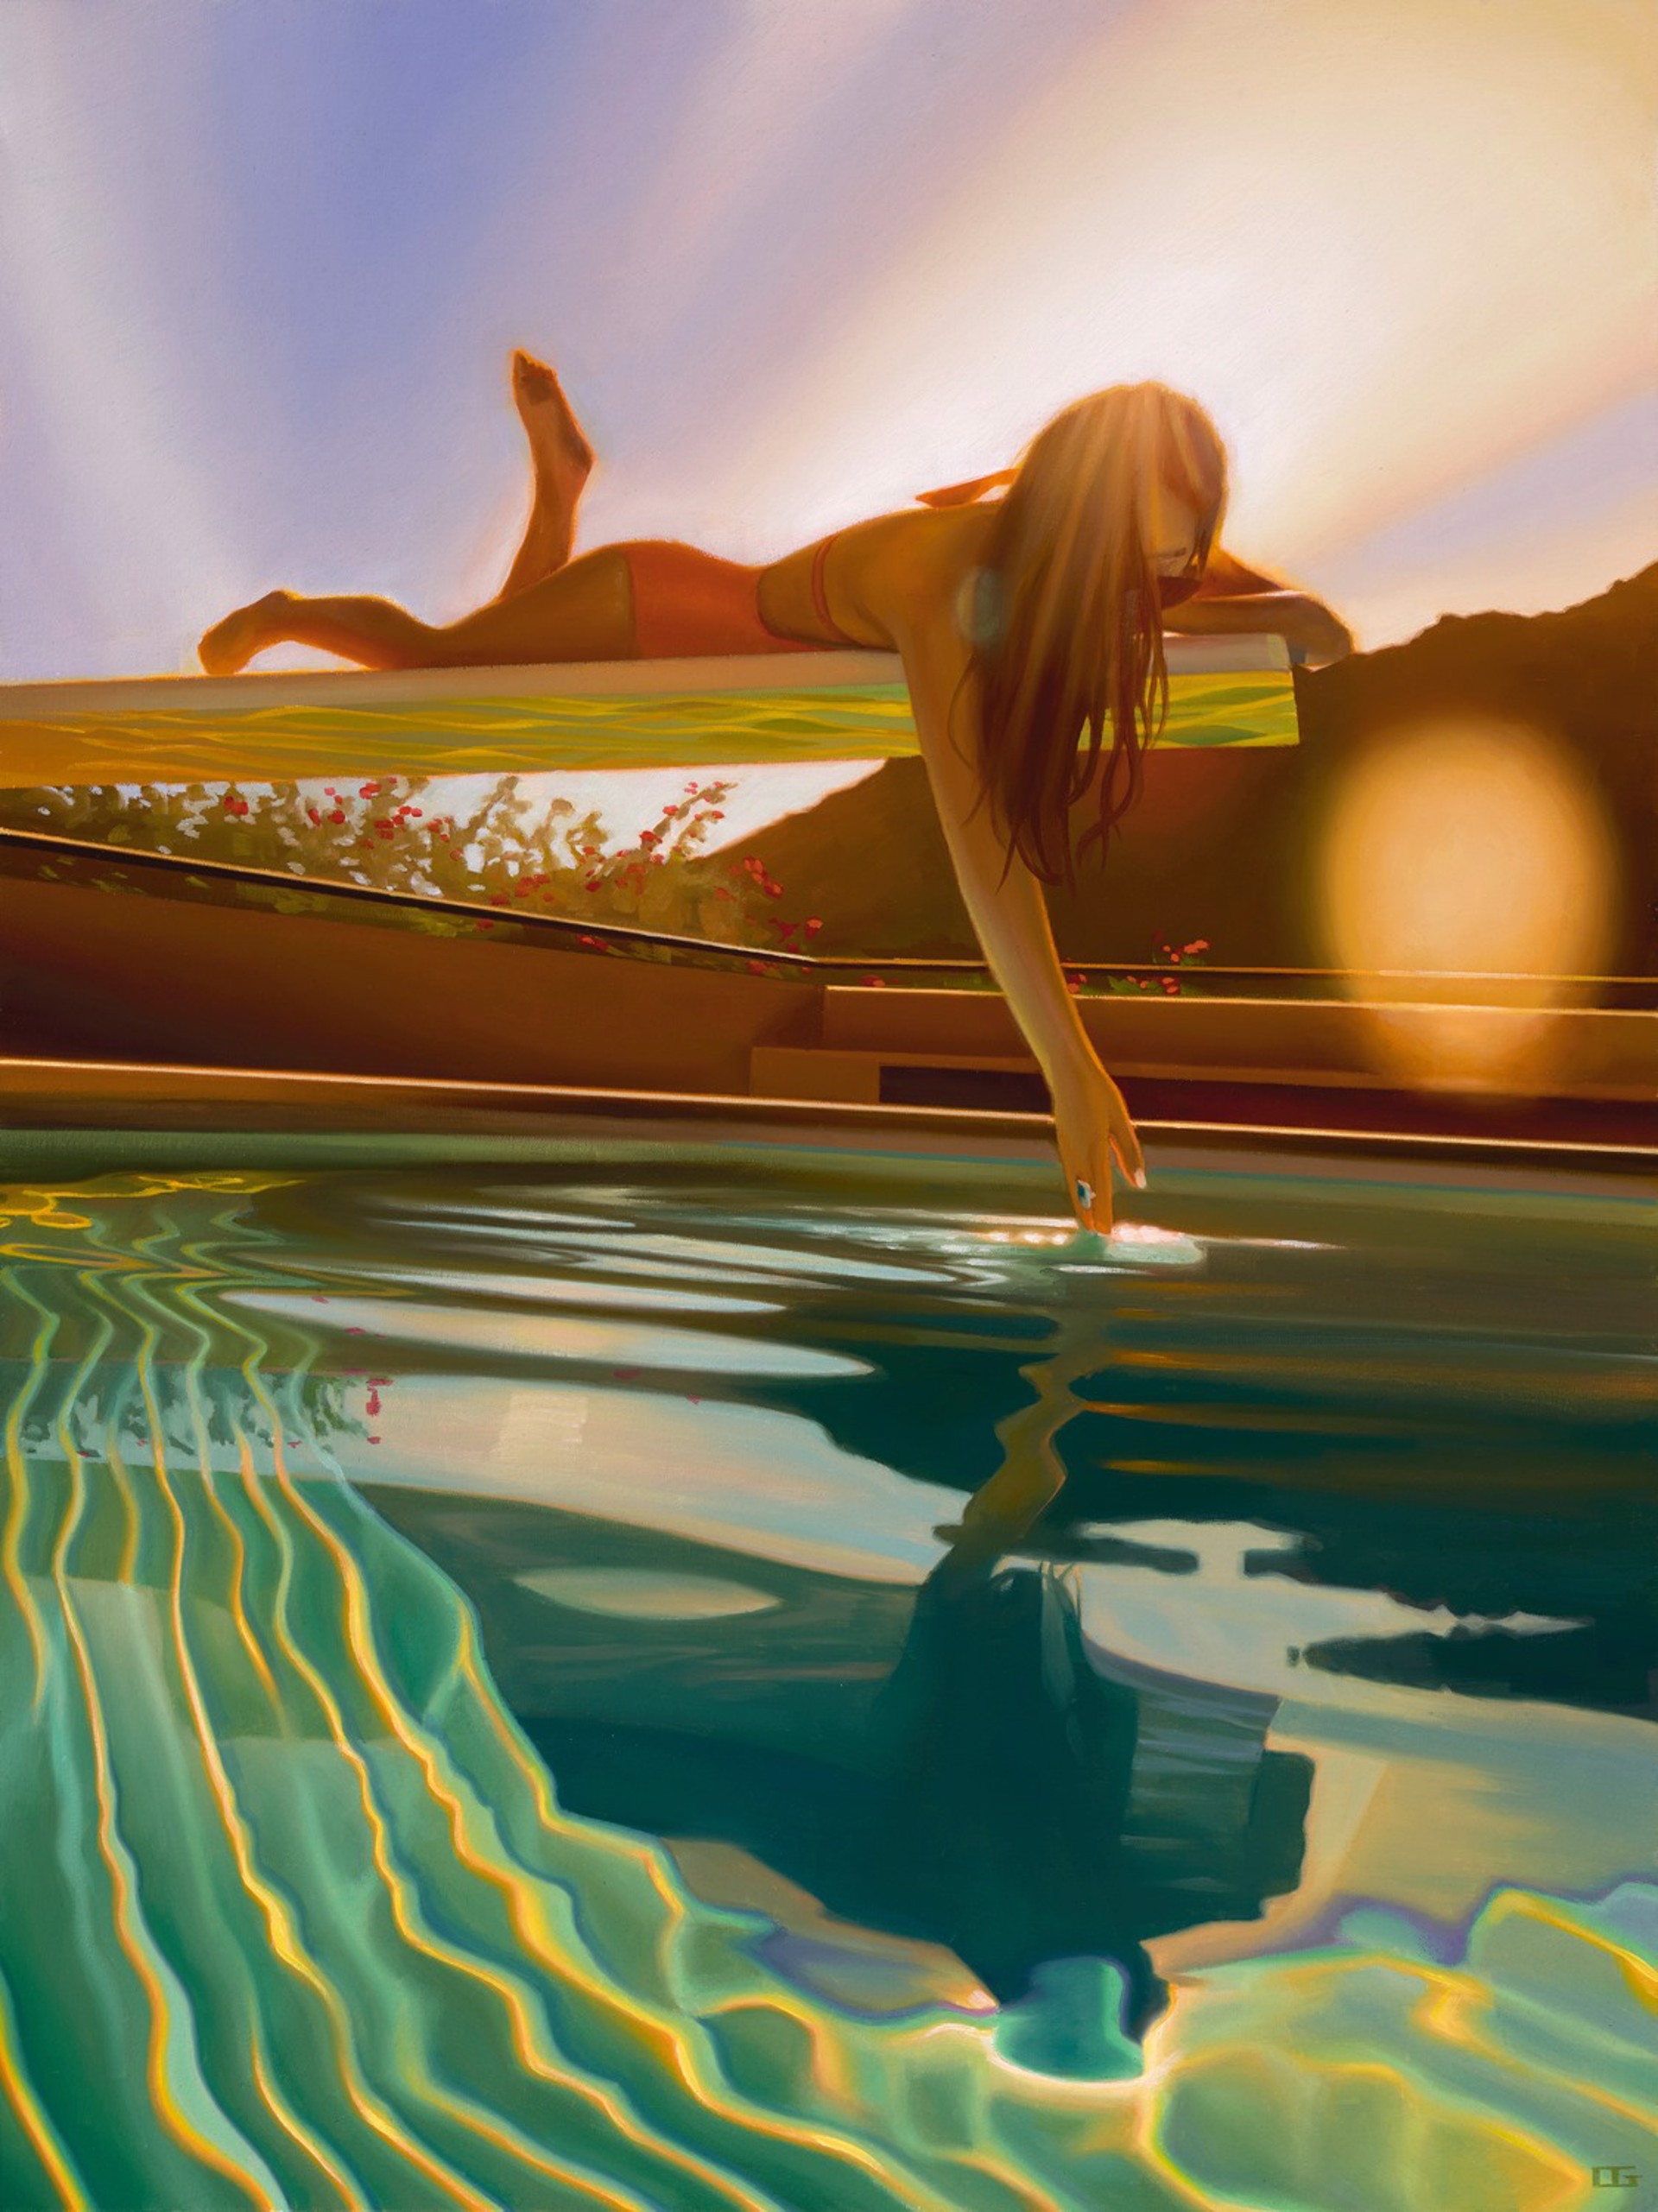 Rainbows In The Water by Carrie Graber